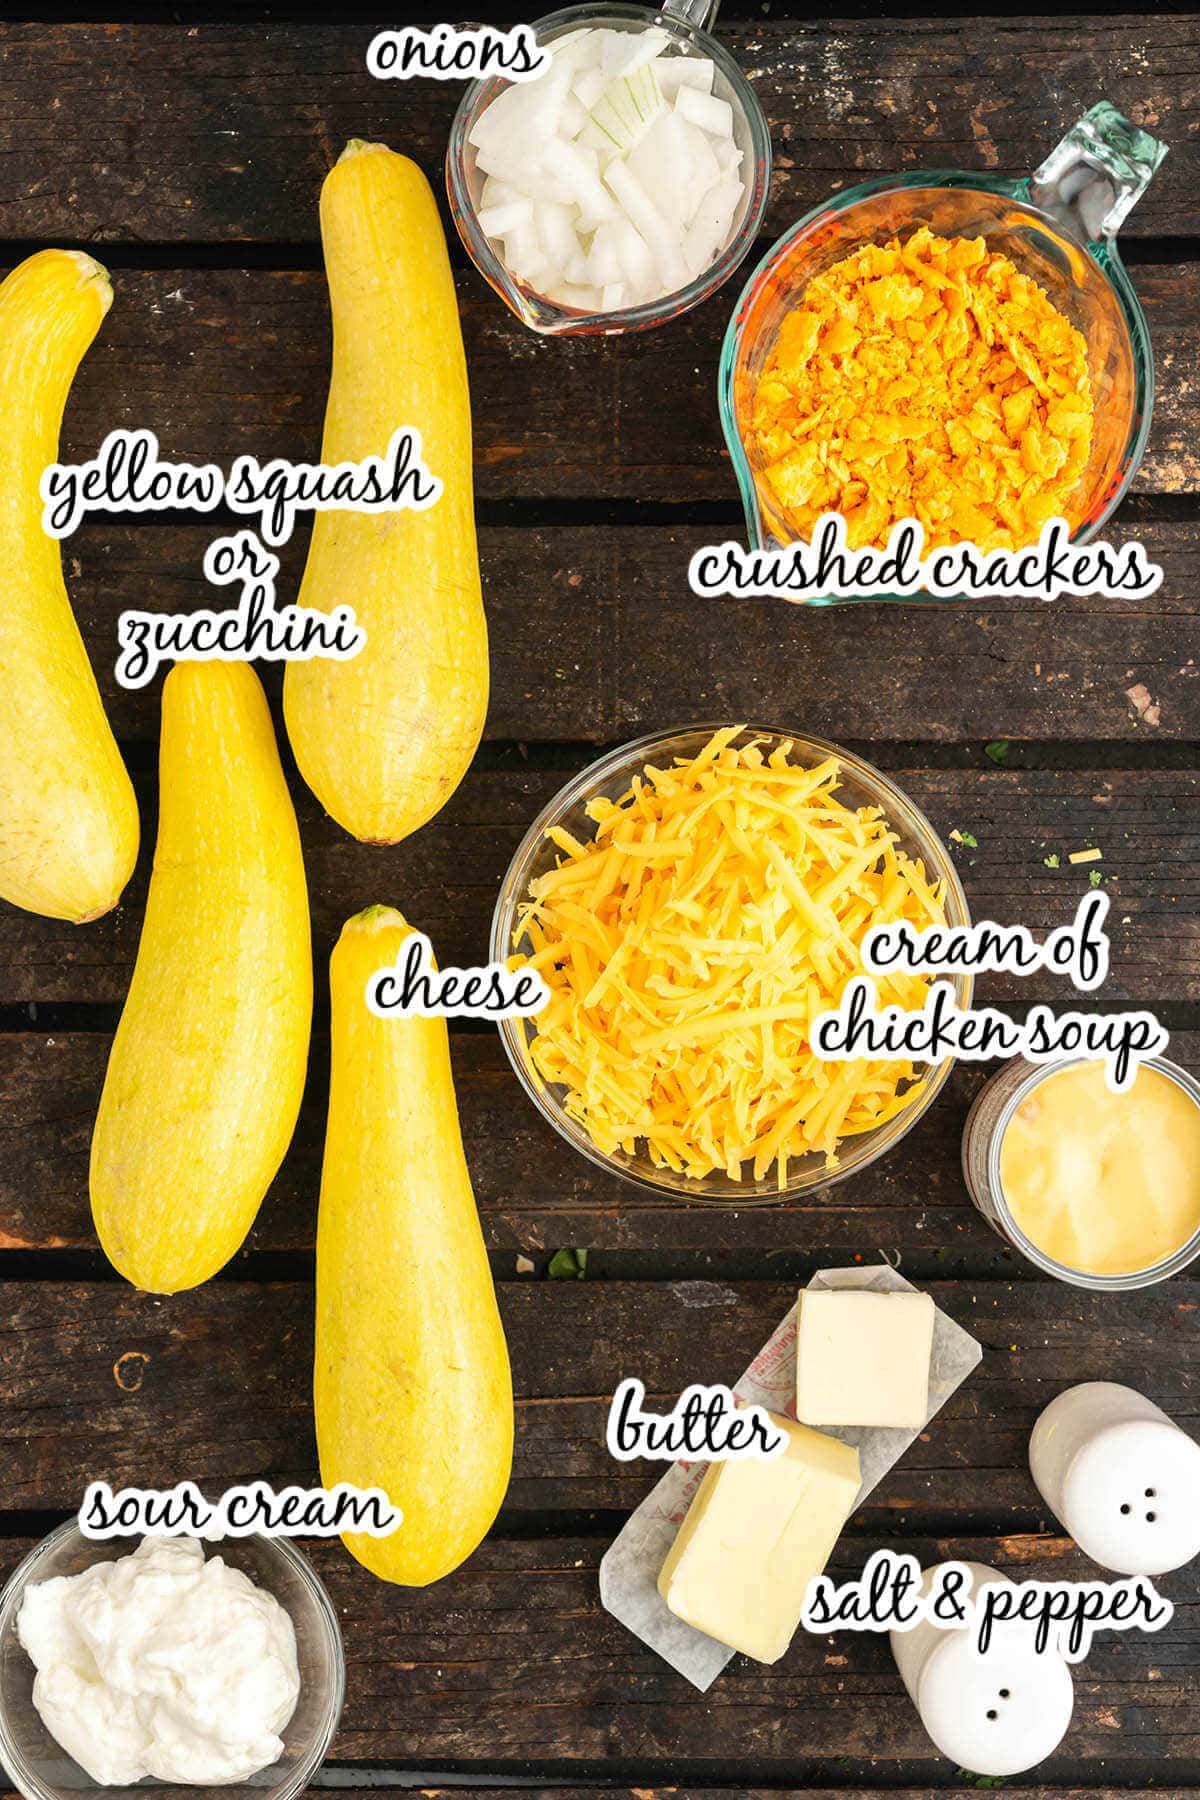 Ingredients to make Old Fashioned Squash Casserole, with print overlay.